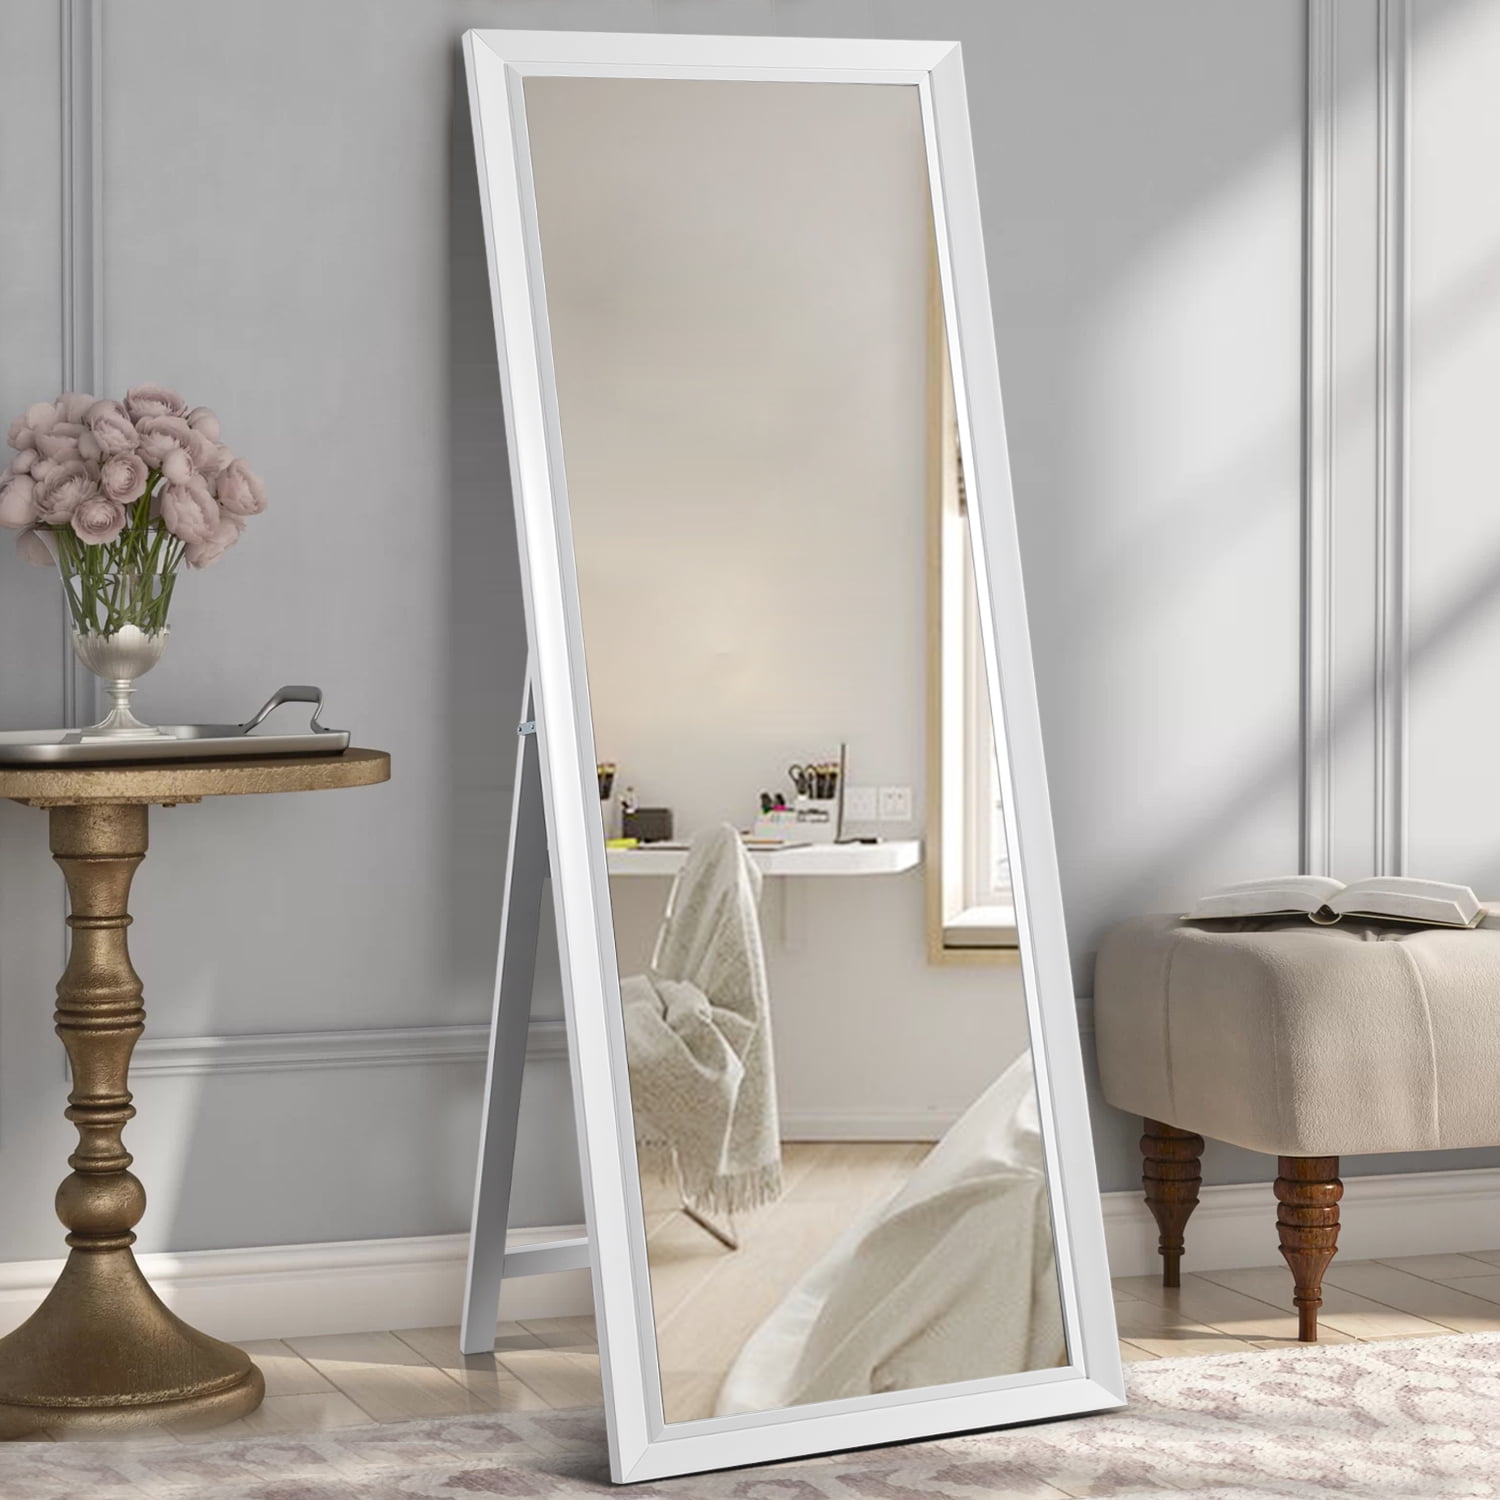 Standing Mirrors Full Length: Reflect Your Style